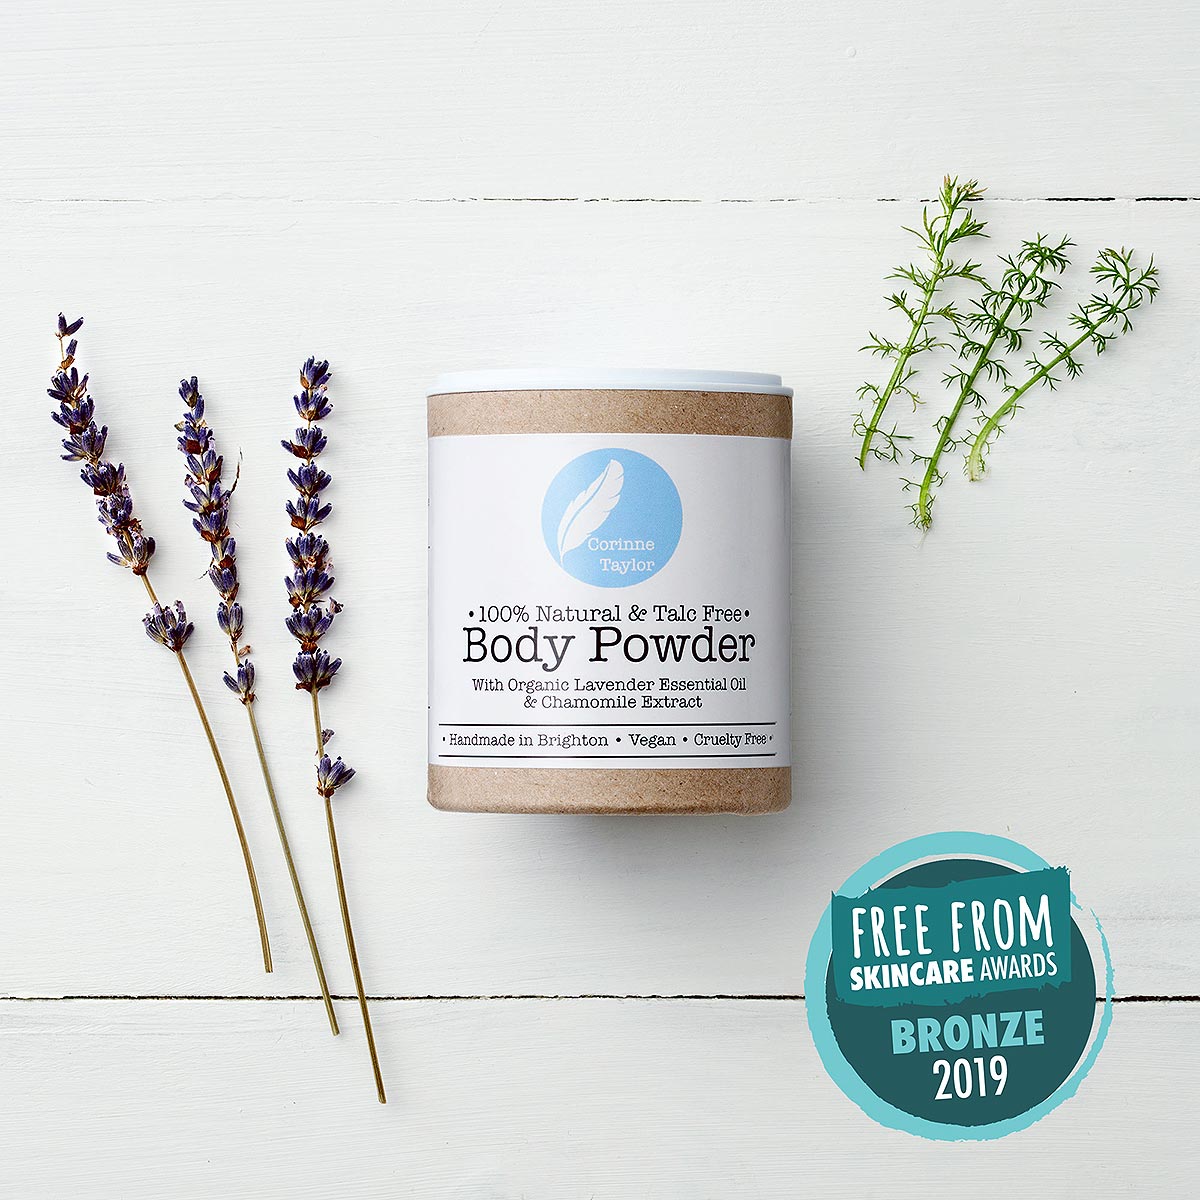 body powder in box with lavender